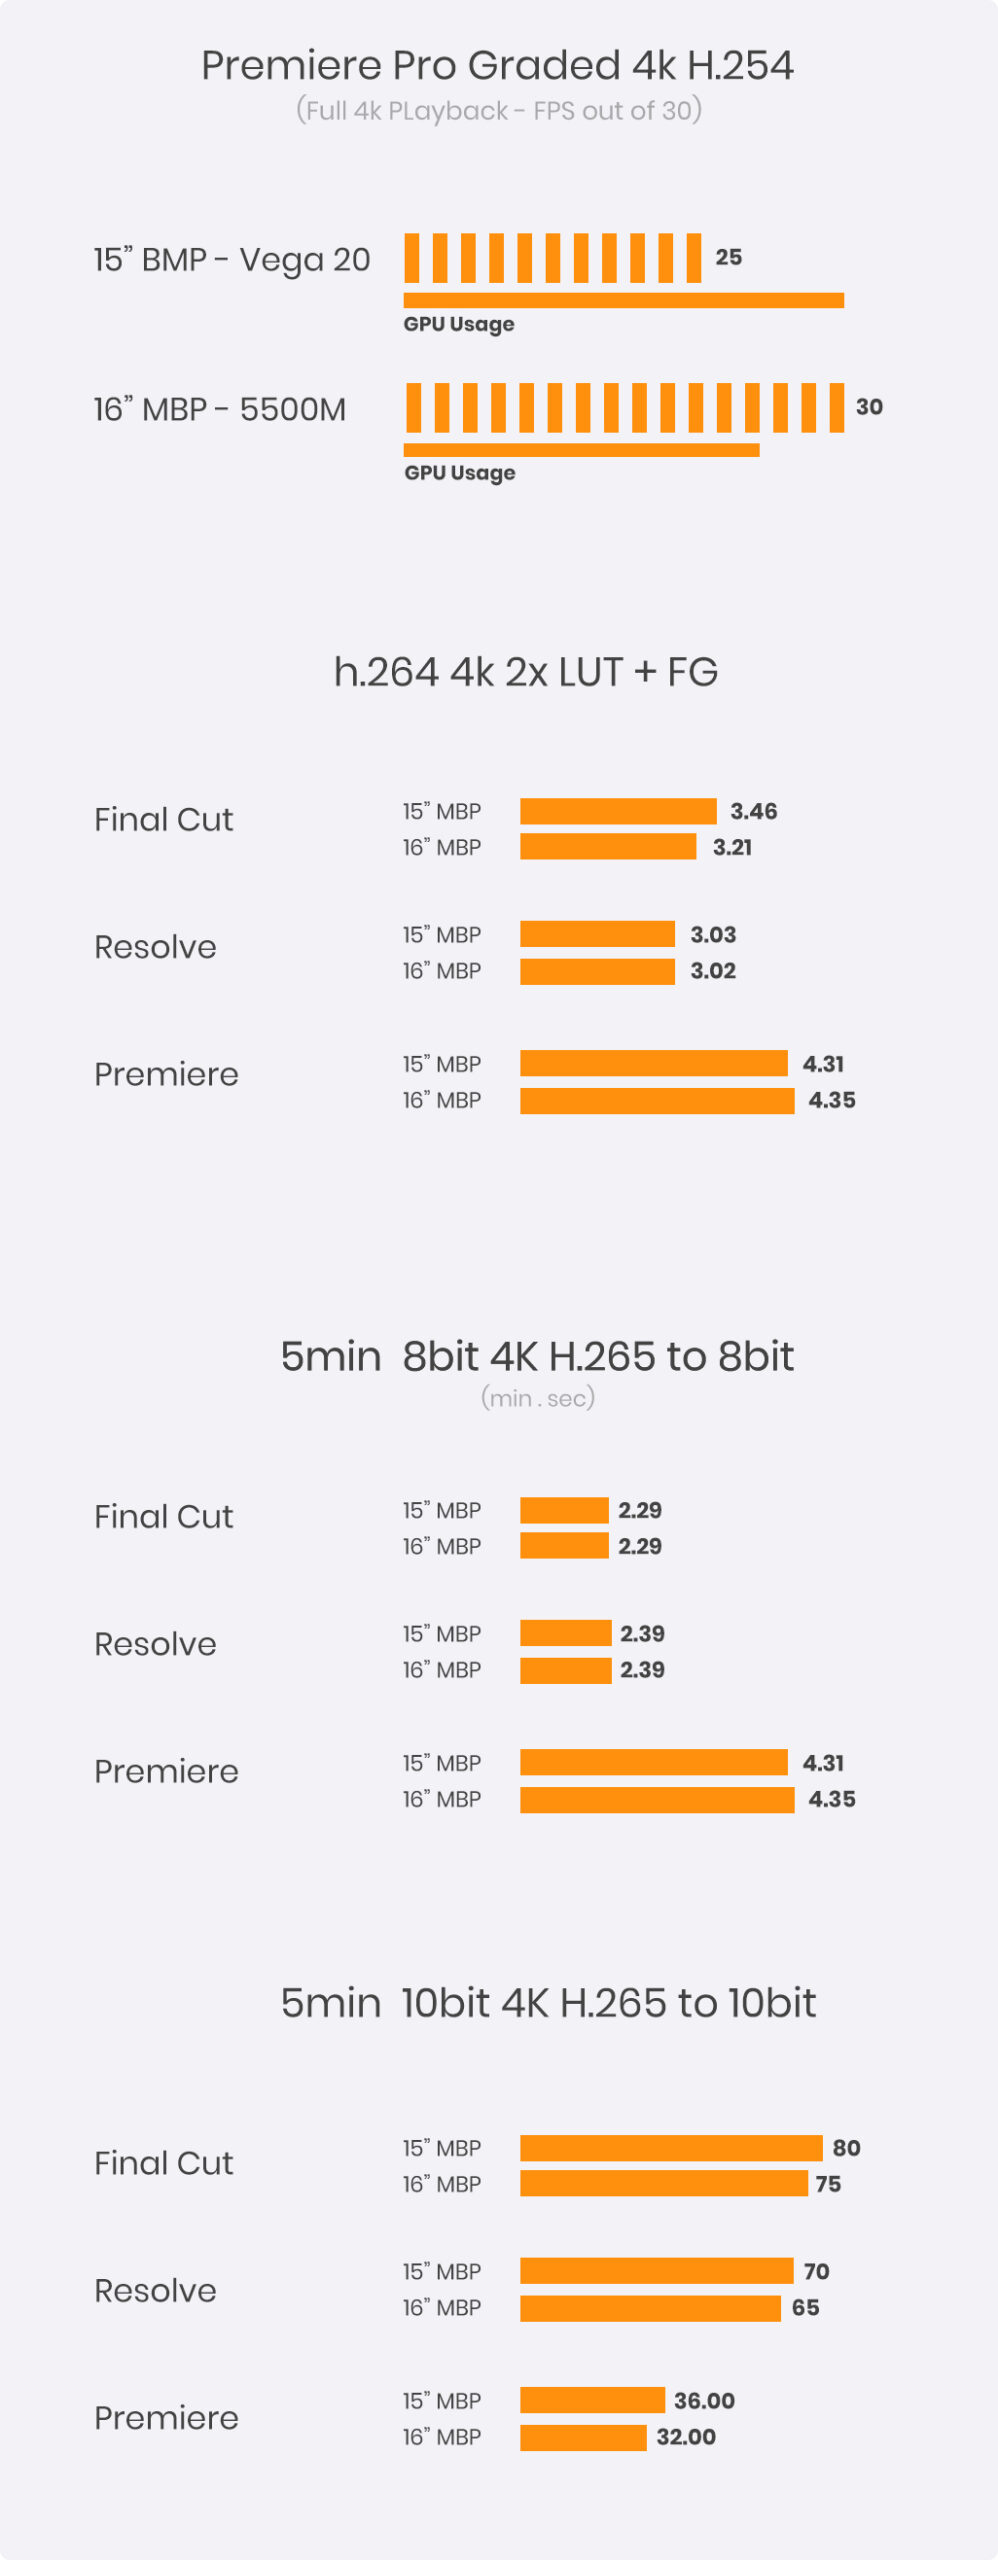 macbook pro 2020 premiere and final cut and resolve benchmark